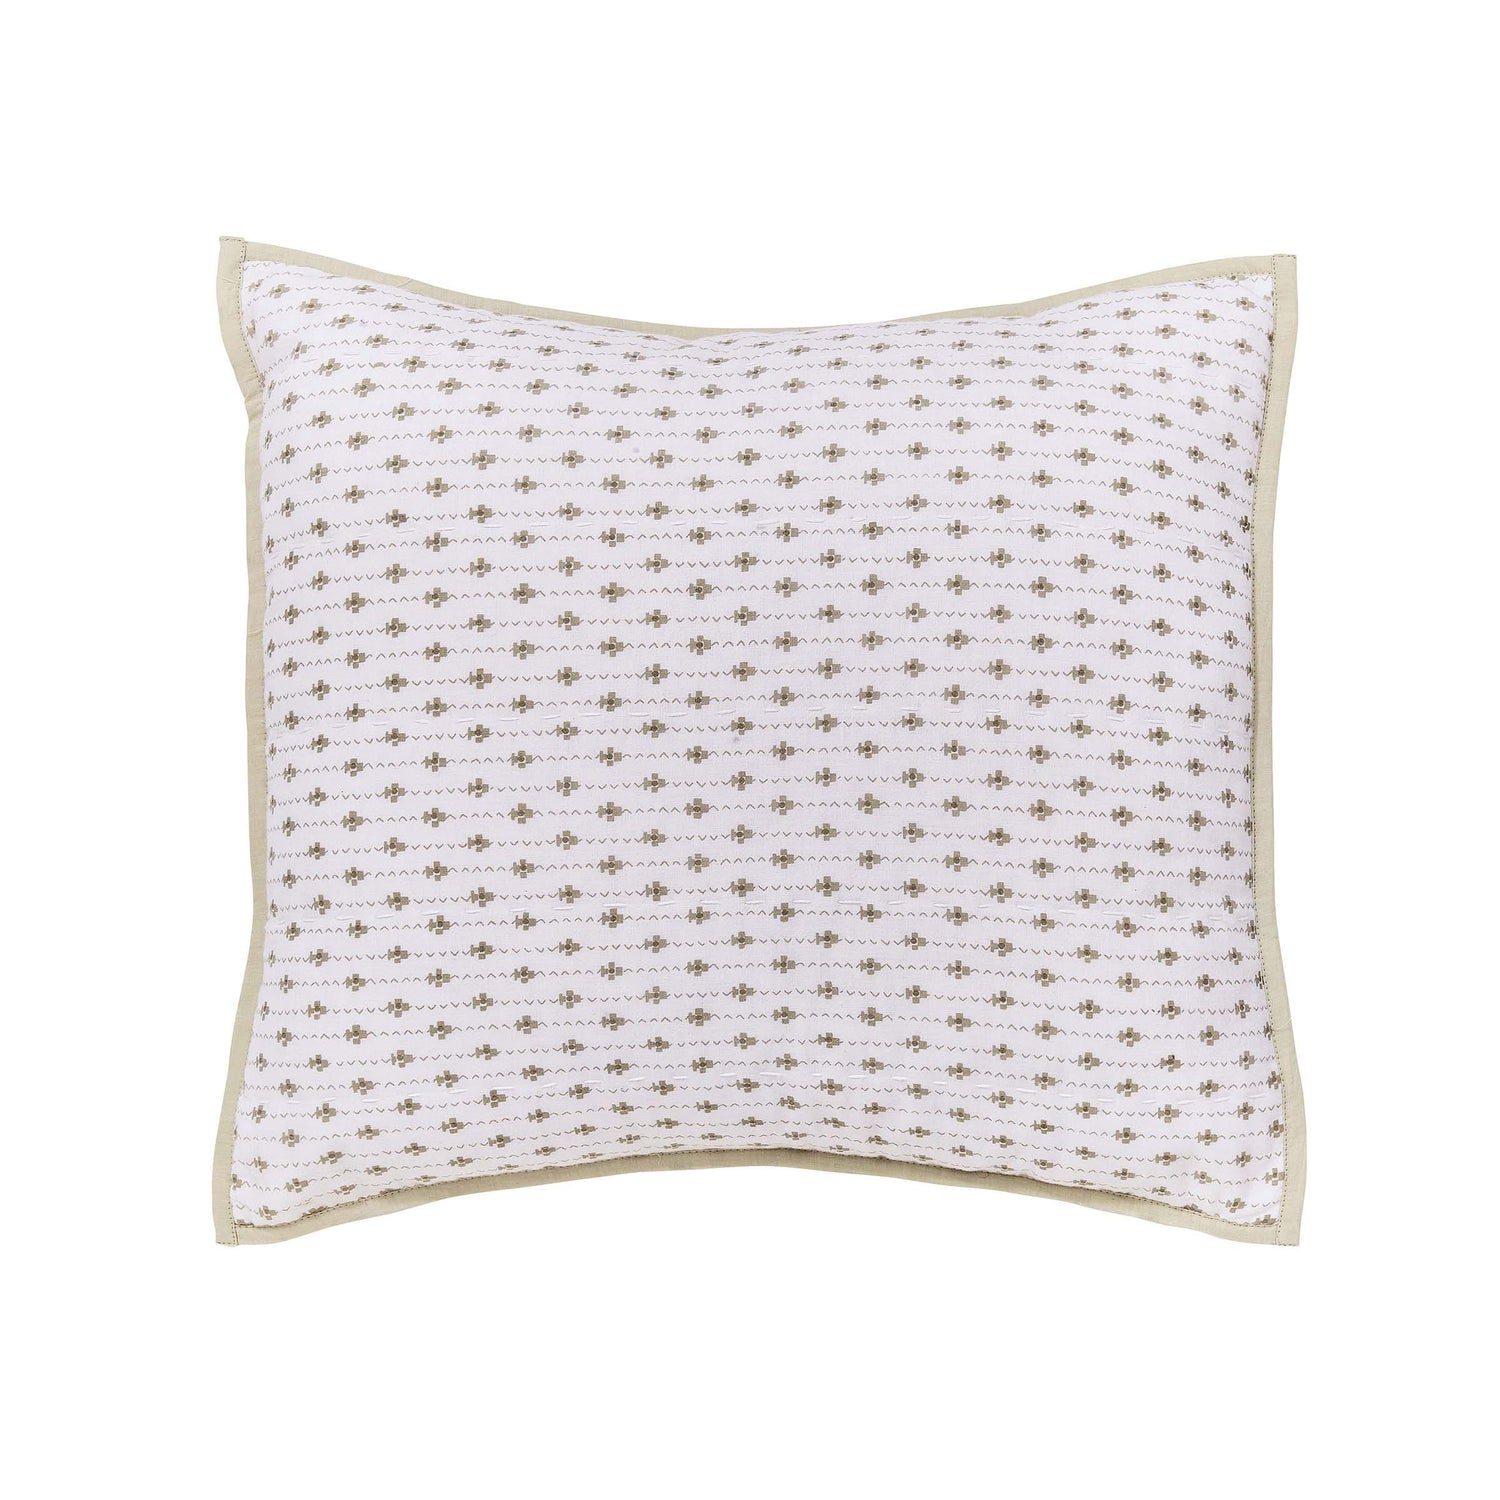 White and Green Patterned Cushion